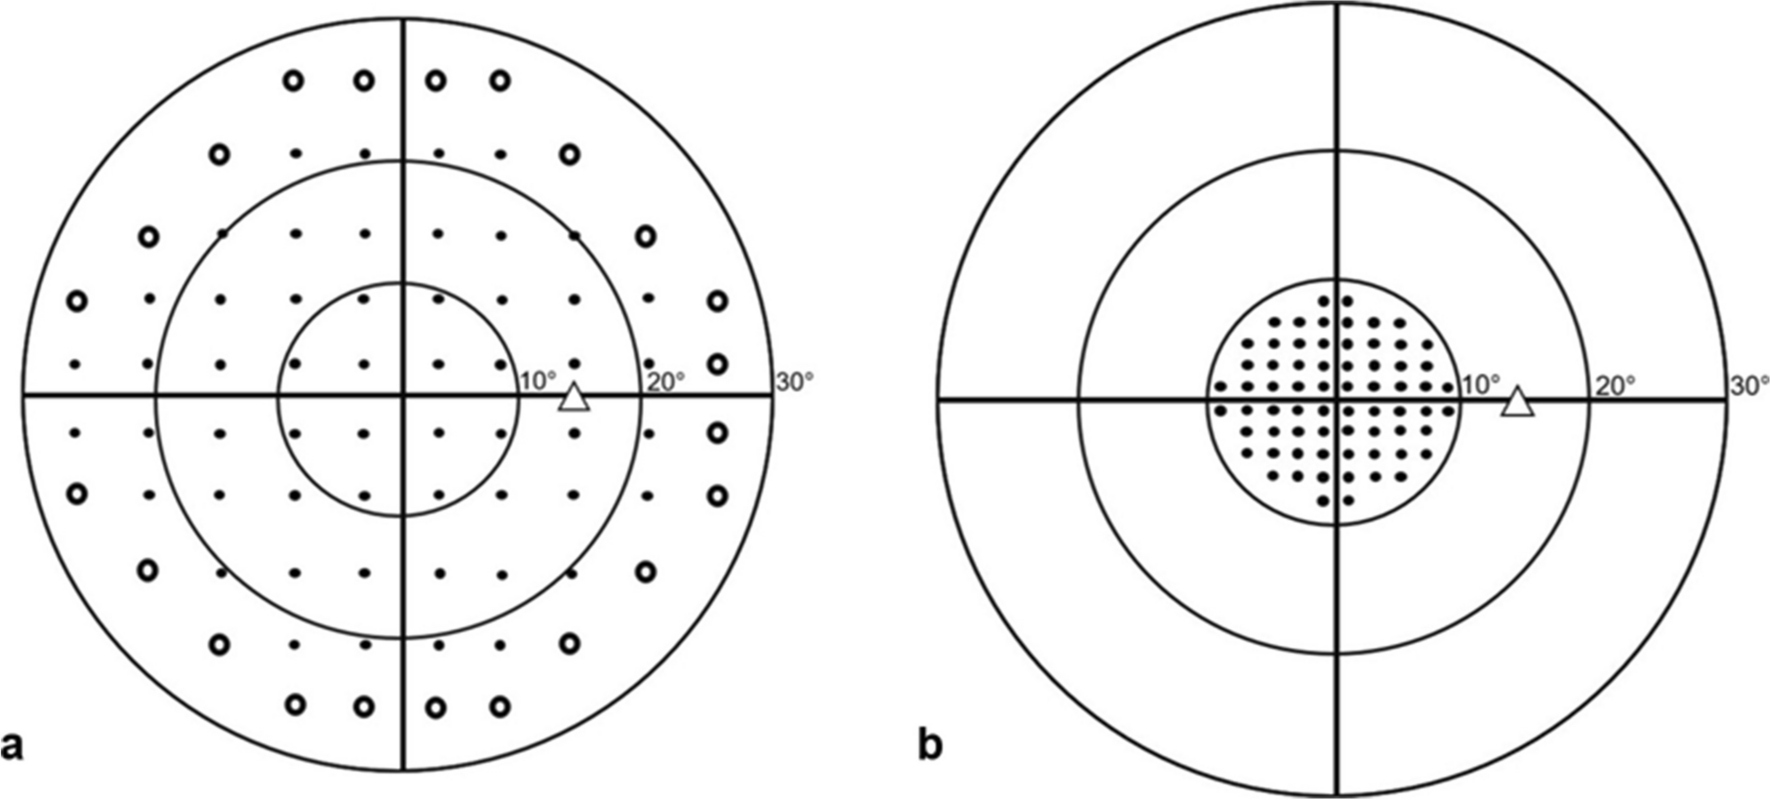 Interpretation of the Visual Field in Neuro-ophthalmic Disorders